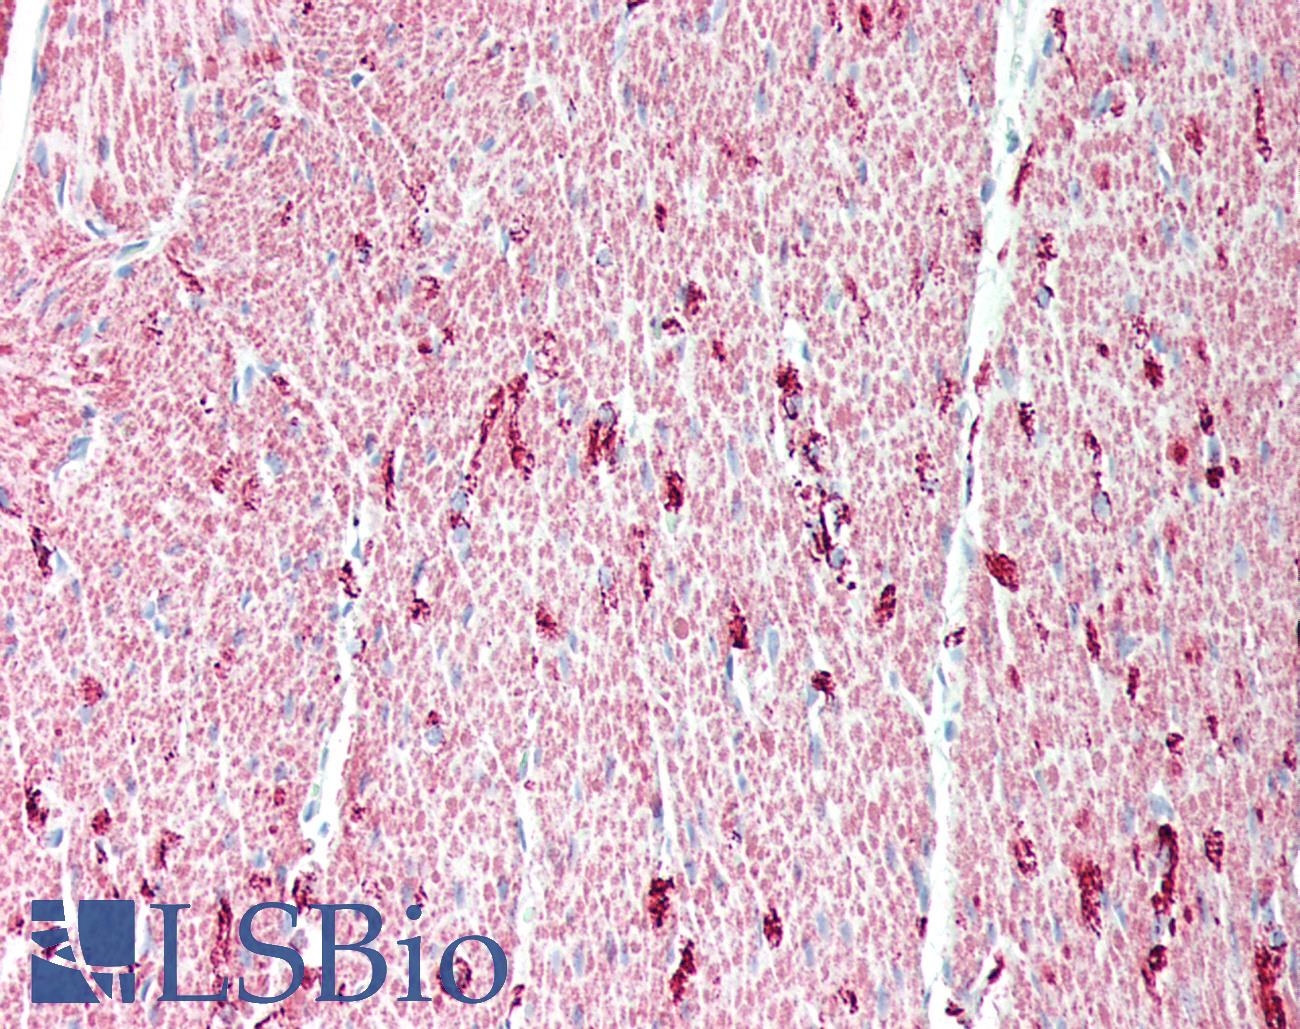 DES / Desmin Antibody - Human colon, smooth muscle: Formalin-Fixed, Paraffin-Embedded (FFPE)